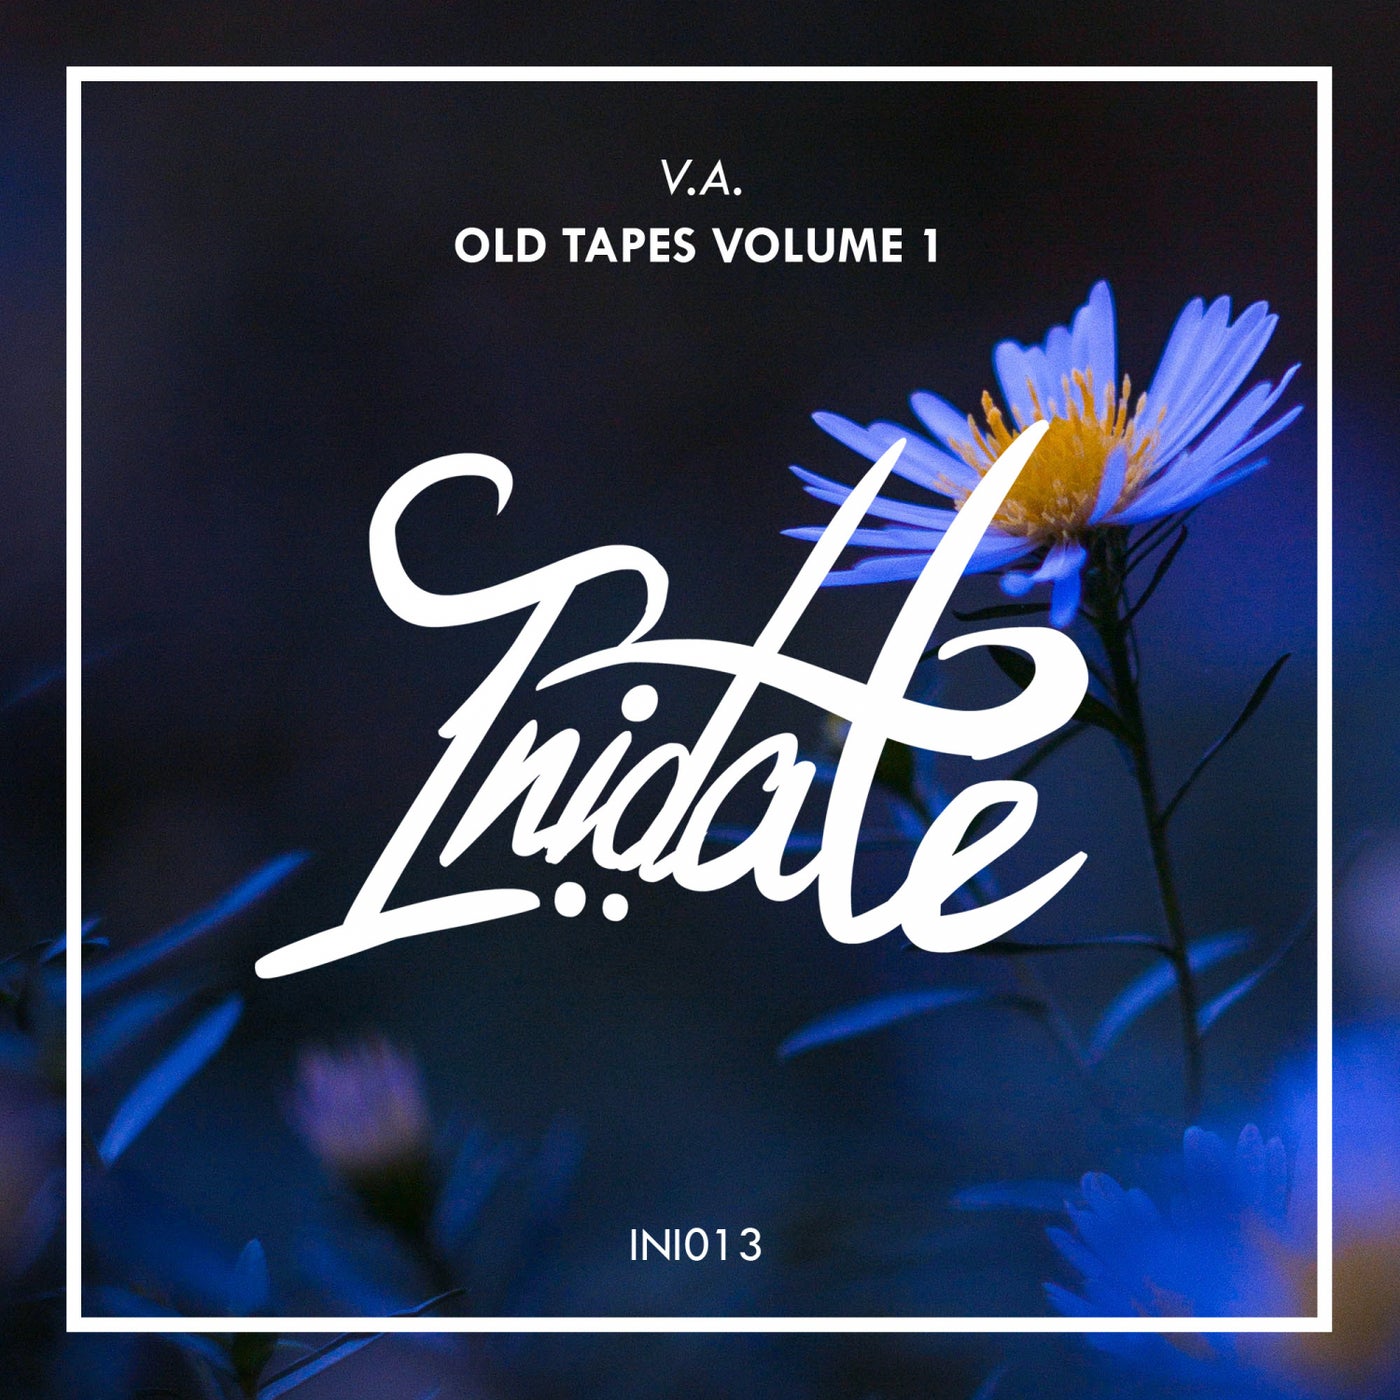 Old Tapes Volume 1